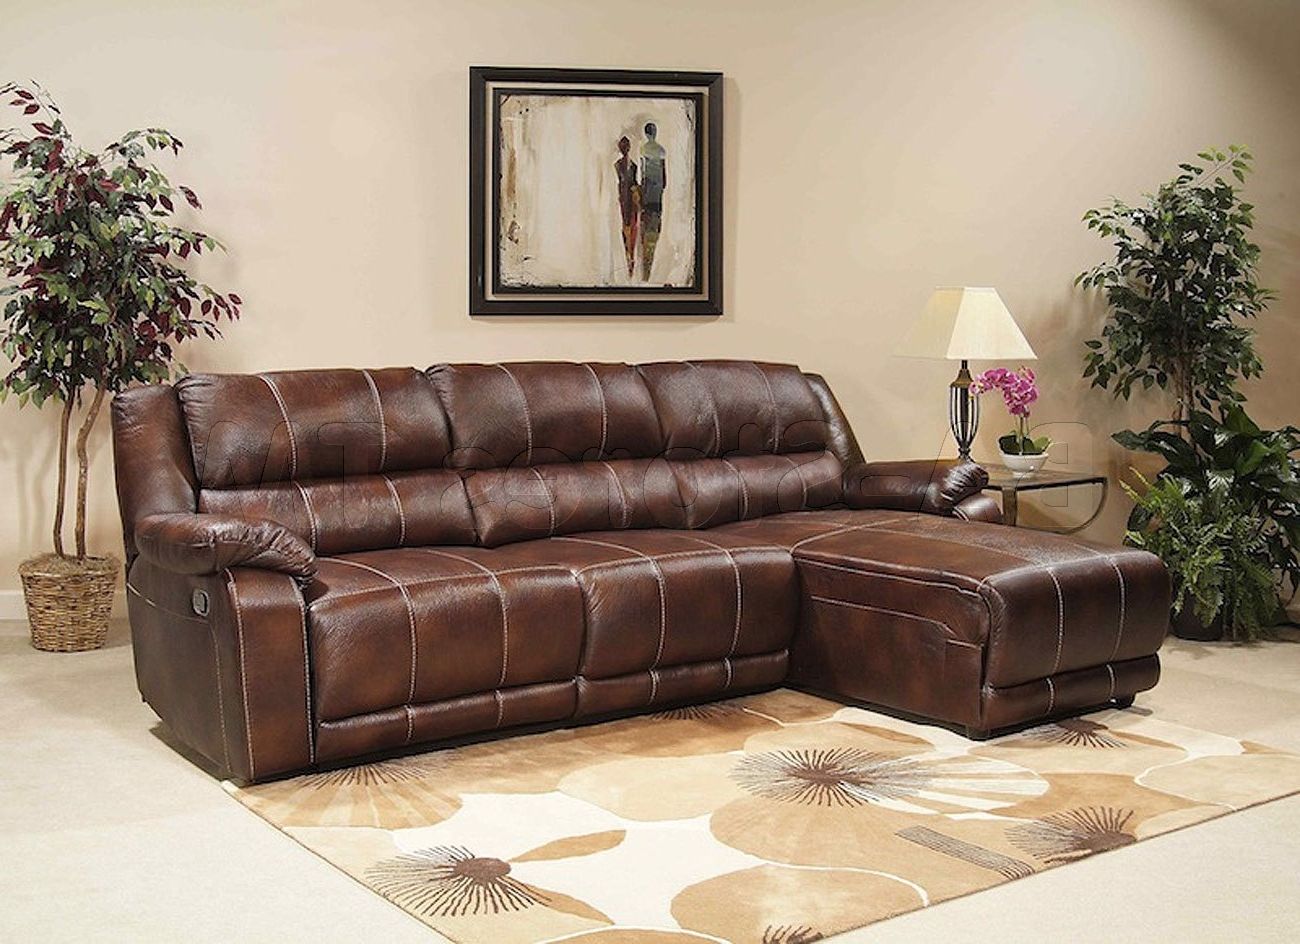 Newest Sectional Couches With Recliner And Chaise Inside Sectional Sofa Design: Affordabale Sectional Reclining Sofa With (Photo 12 of 15)